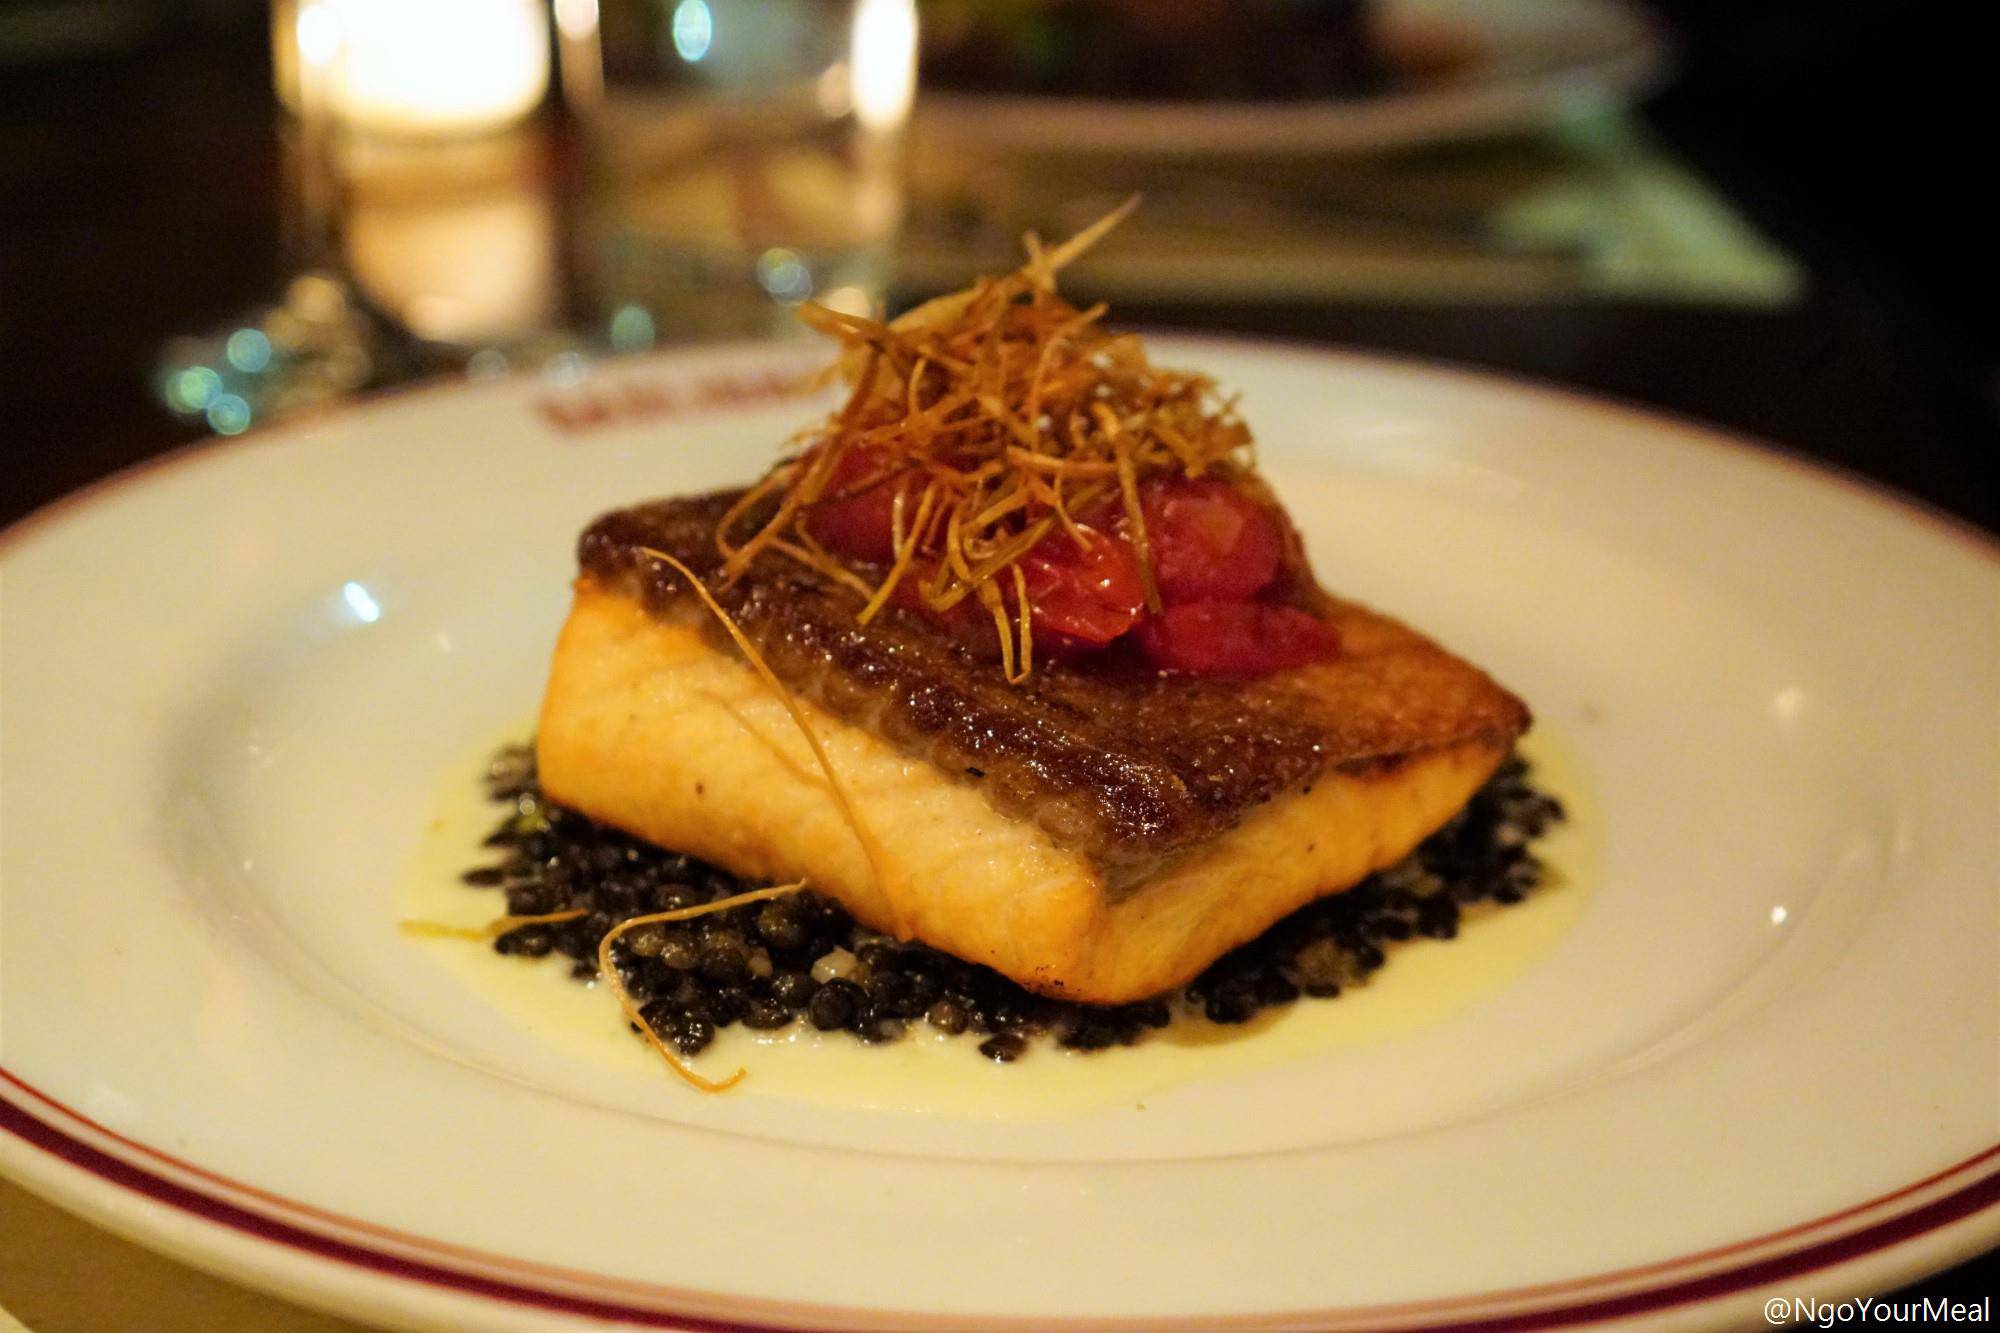 Pan-Roasted Salmon with French Lentils, Leek Soubise, Blistered Cherry Tomatoes, Crispy Leeks at Gaslight in Boston